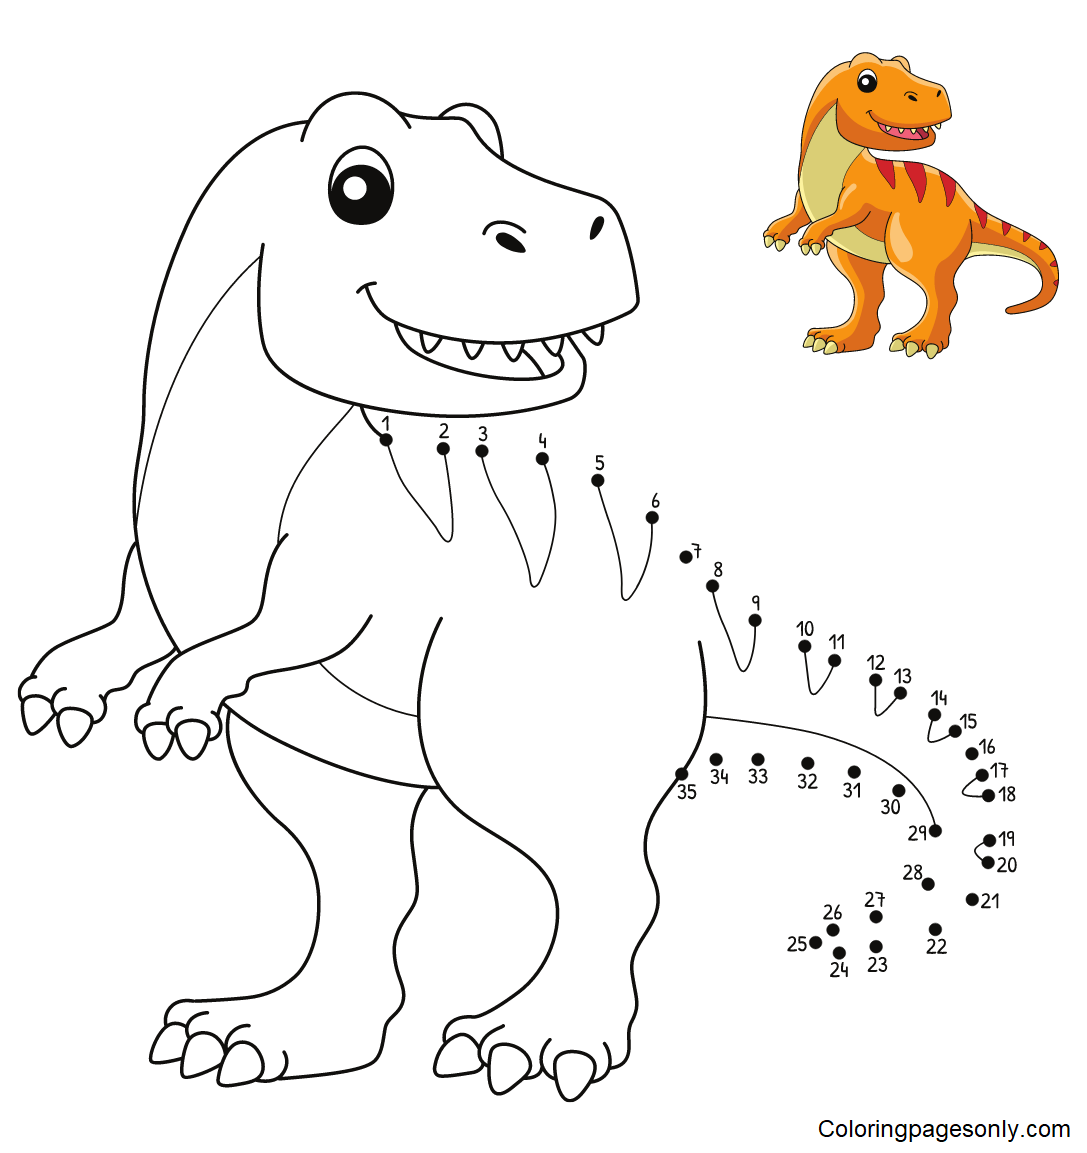 Dot to Dot Dinosaur Printable Coloring Pages